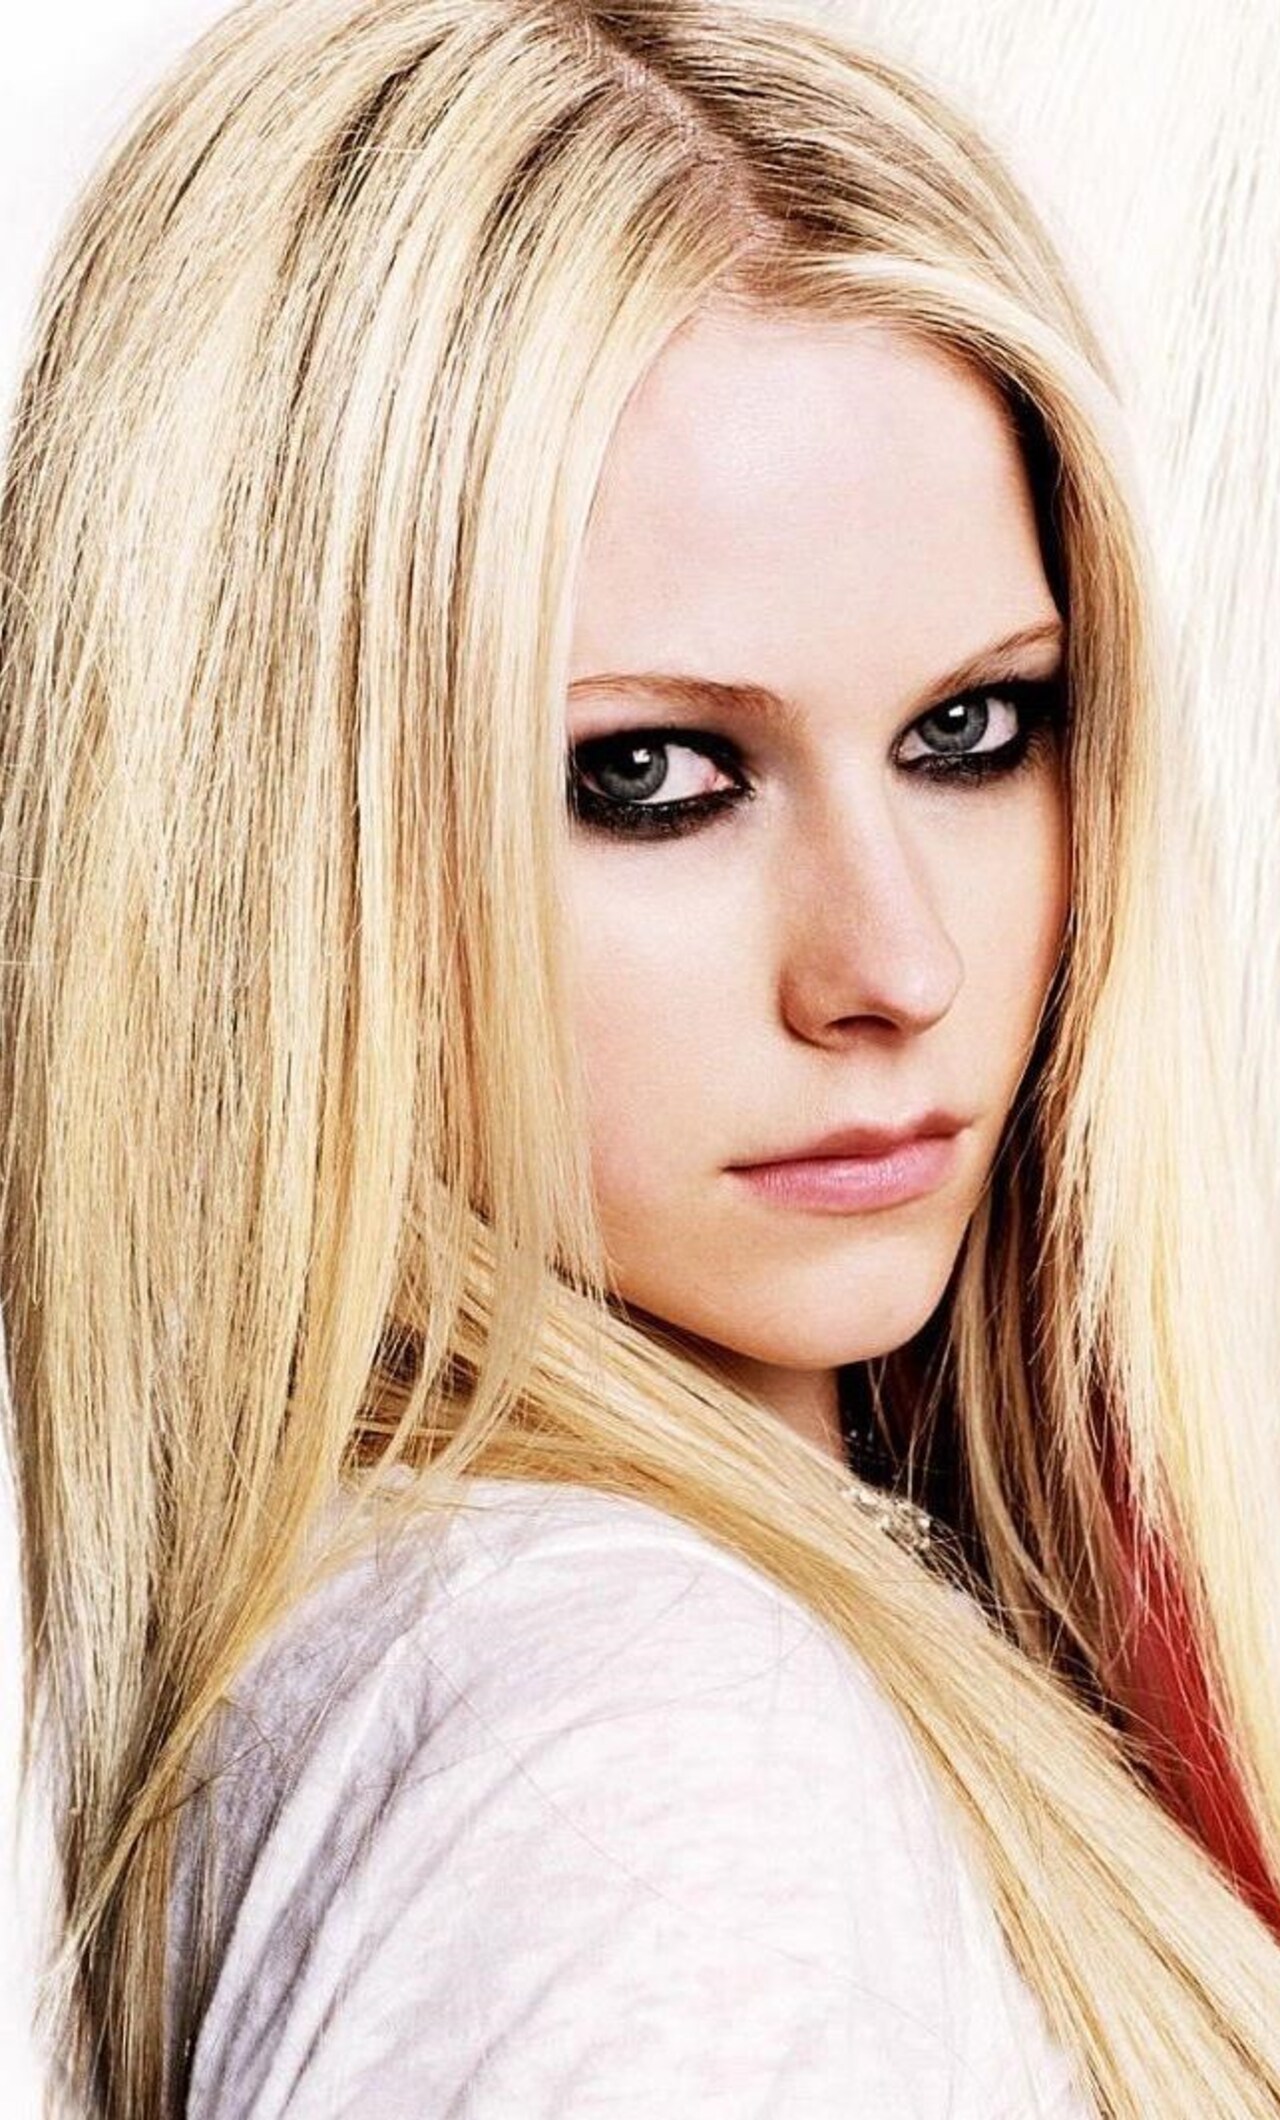 Avril Lavinge Blonde Hairs In 1280x2120 Resolution. avril-lavinge-blonde-ha...